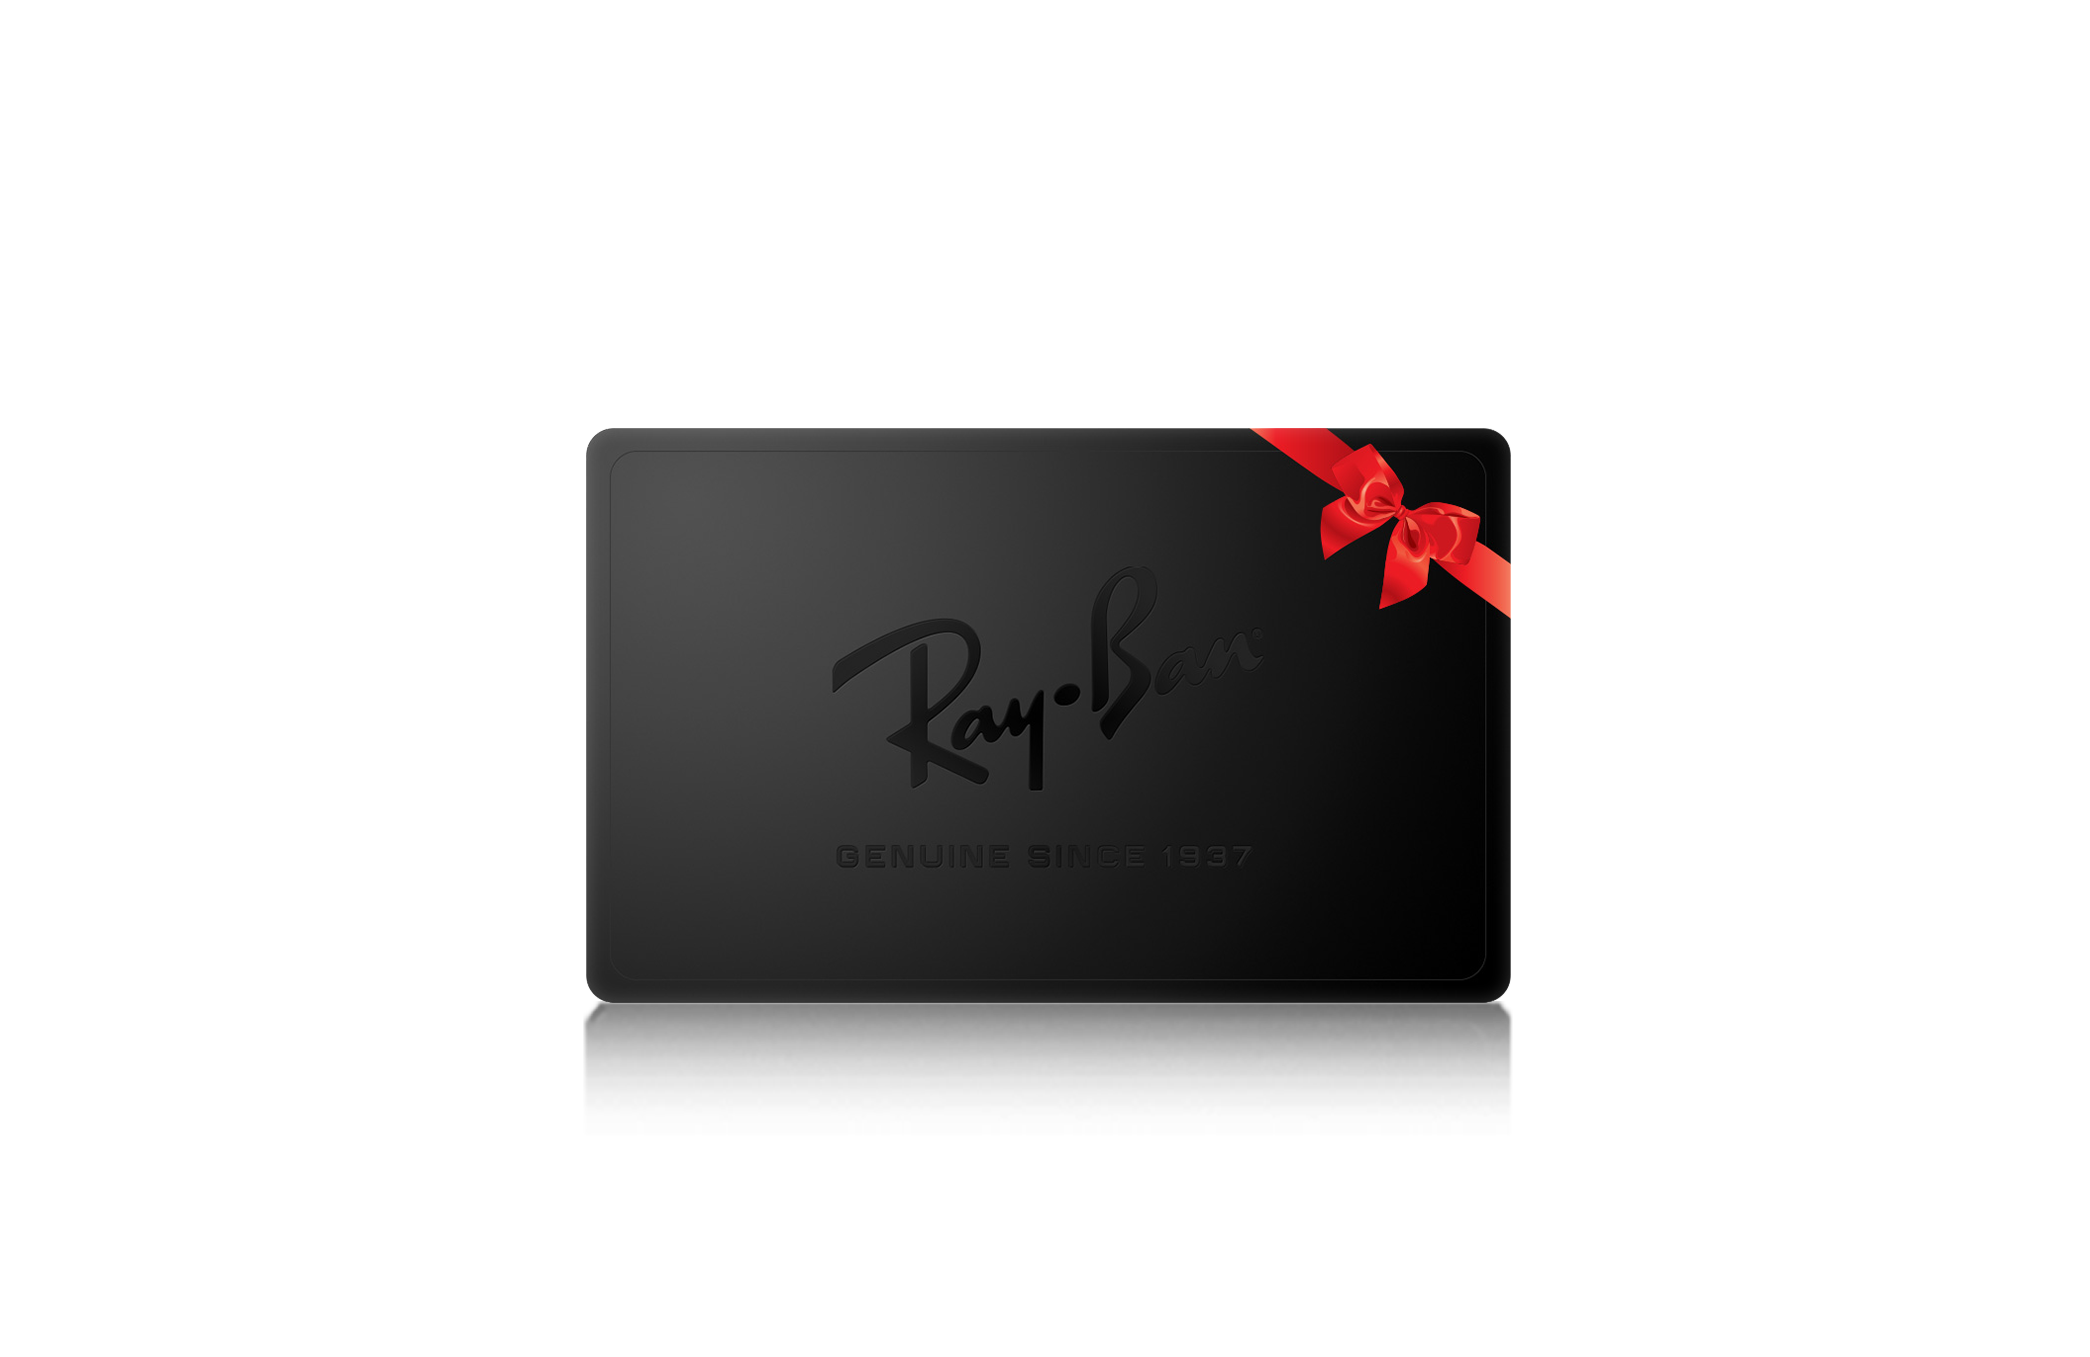 Ray-Ban ONLINE GIFT CARD 